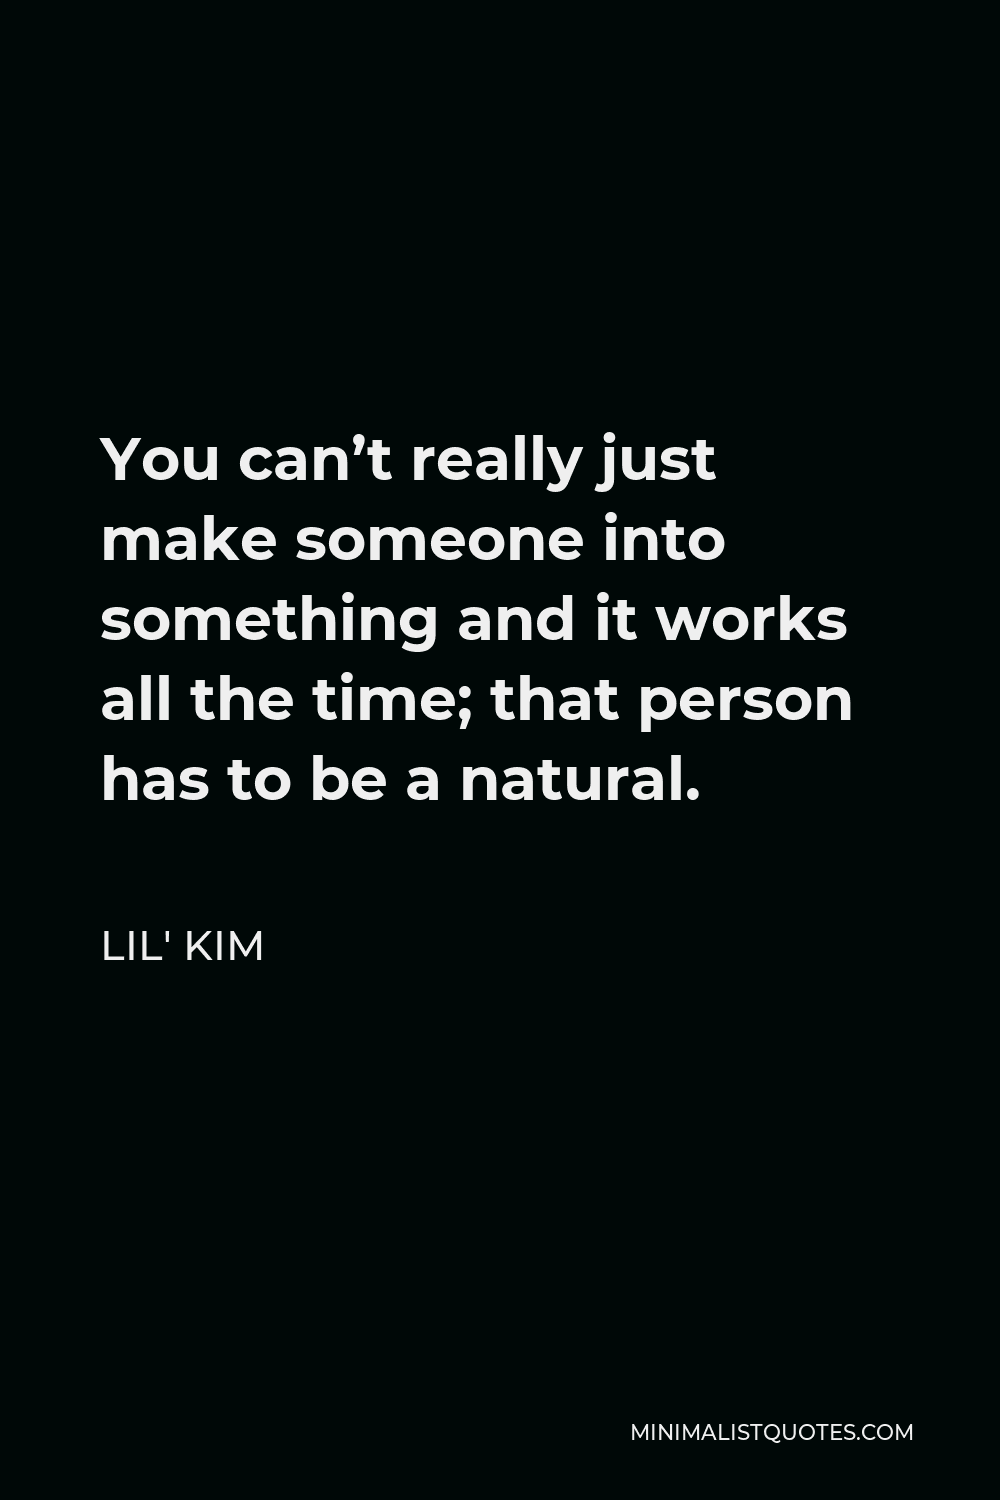 Lil' Kim Quote - You can’t really just make someone into something and it works all the time; that person has to be a natural.